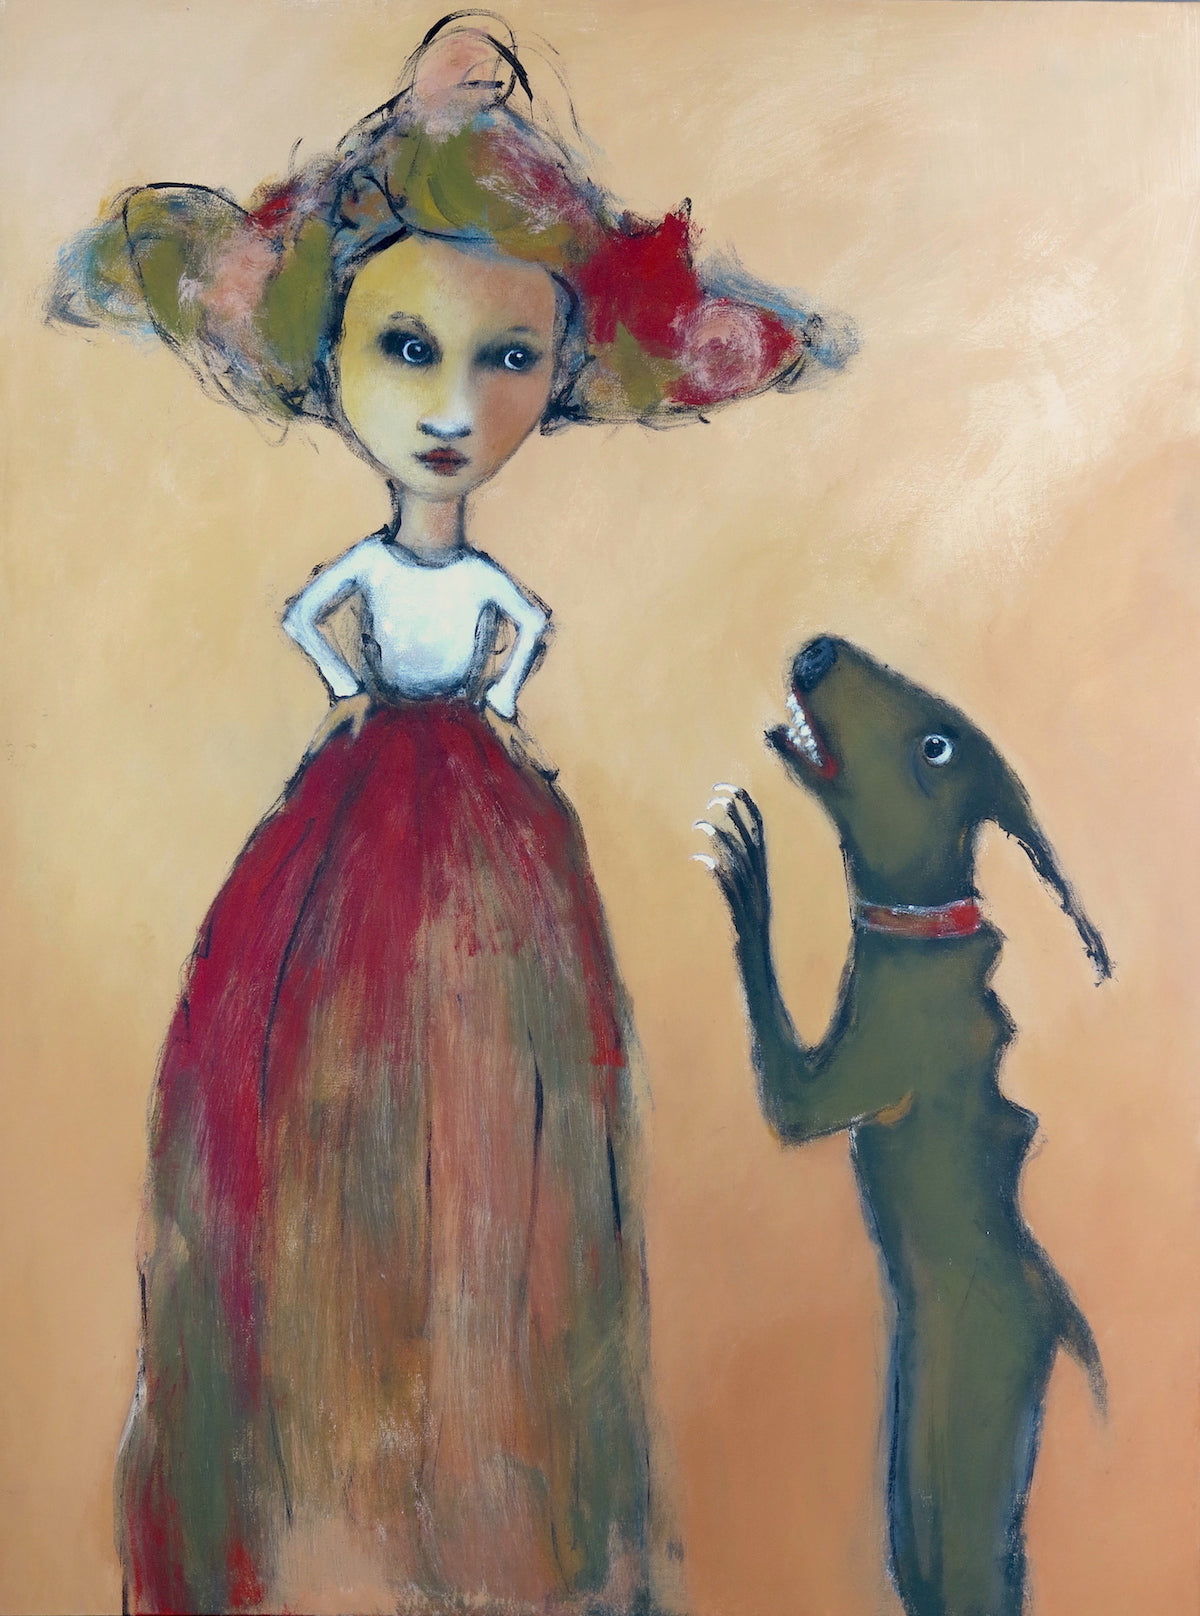 SOLD  "Mary Confronts Her Demanding Little Fears"